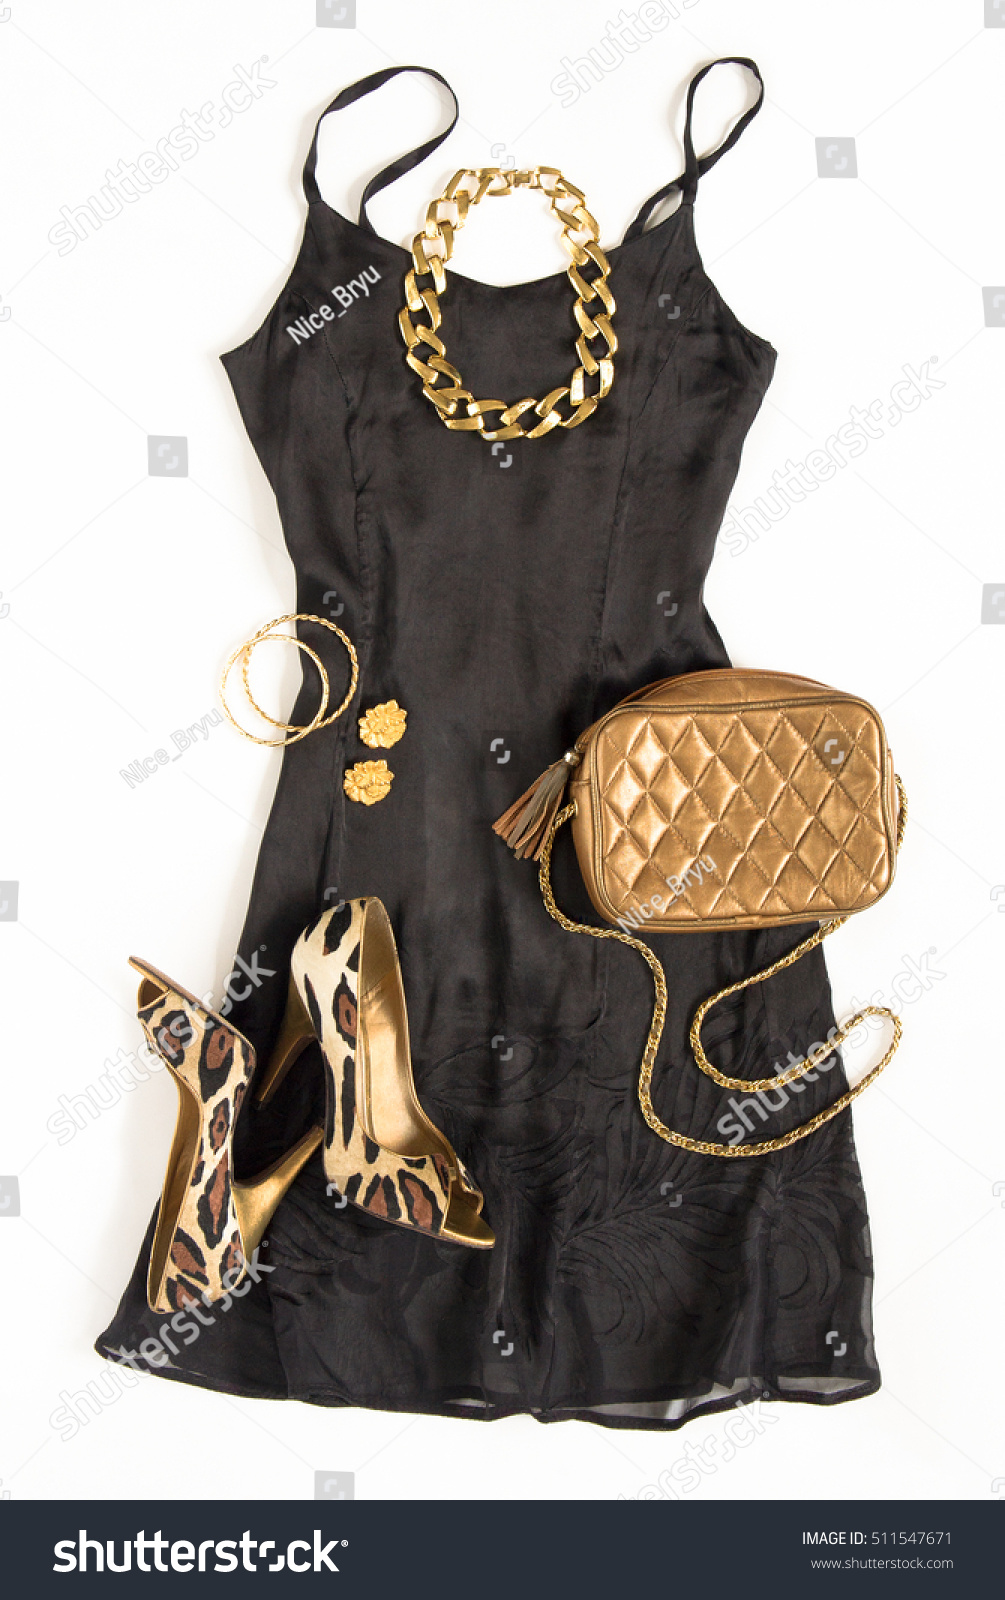 black white and gold party outfits